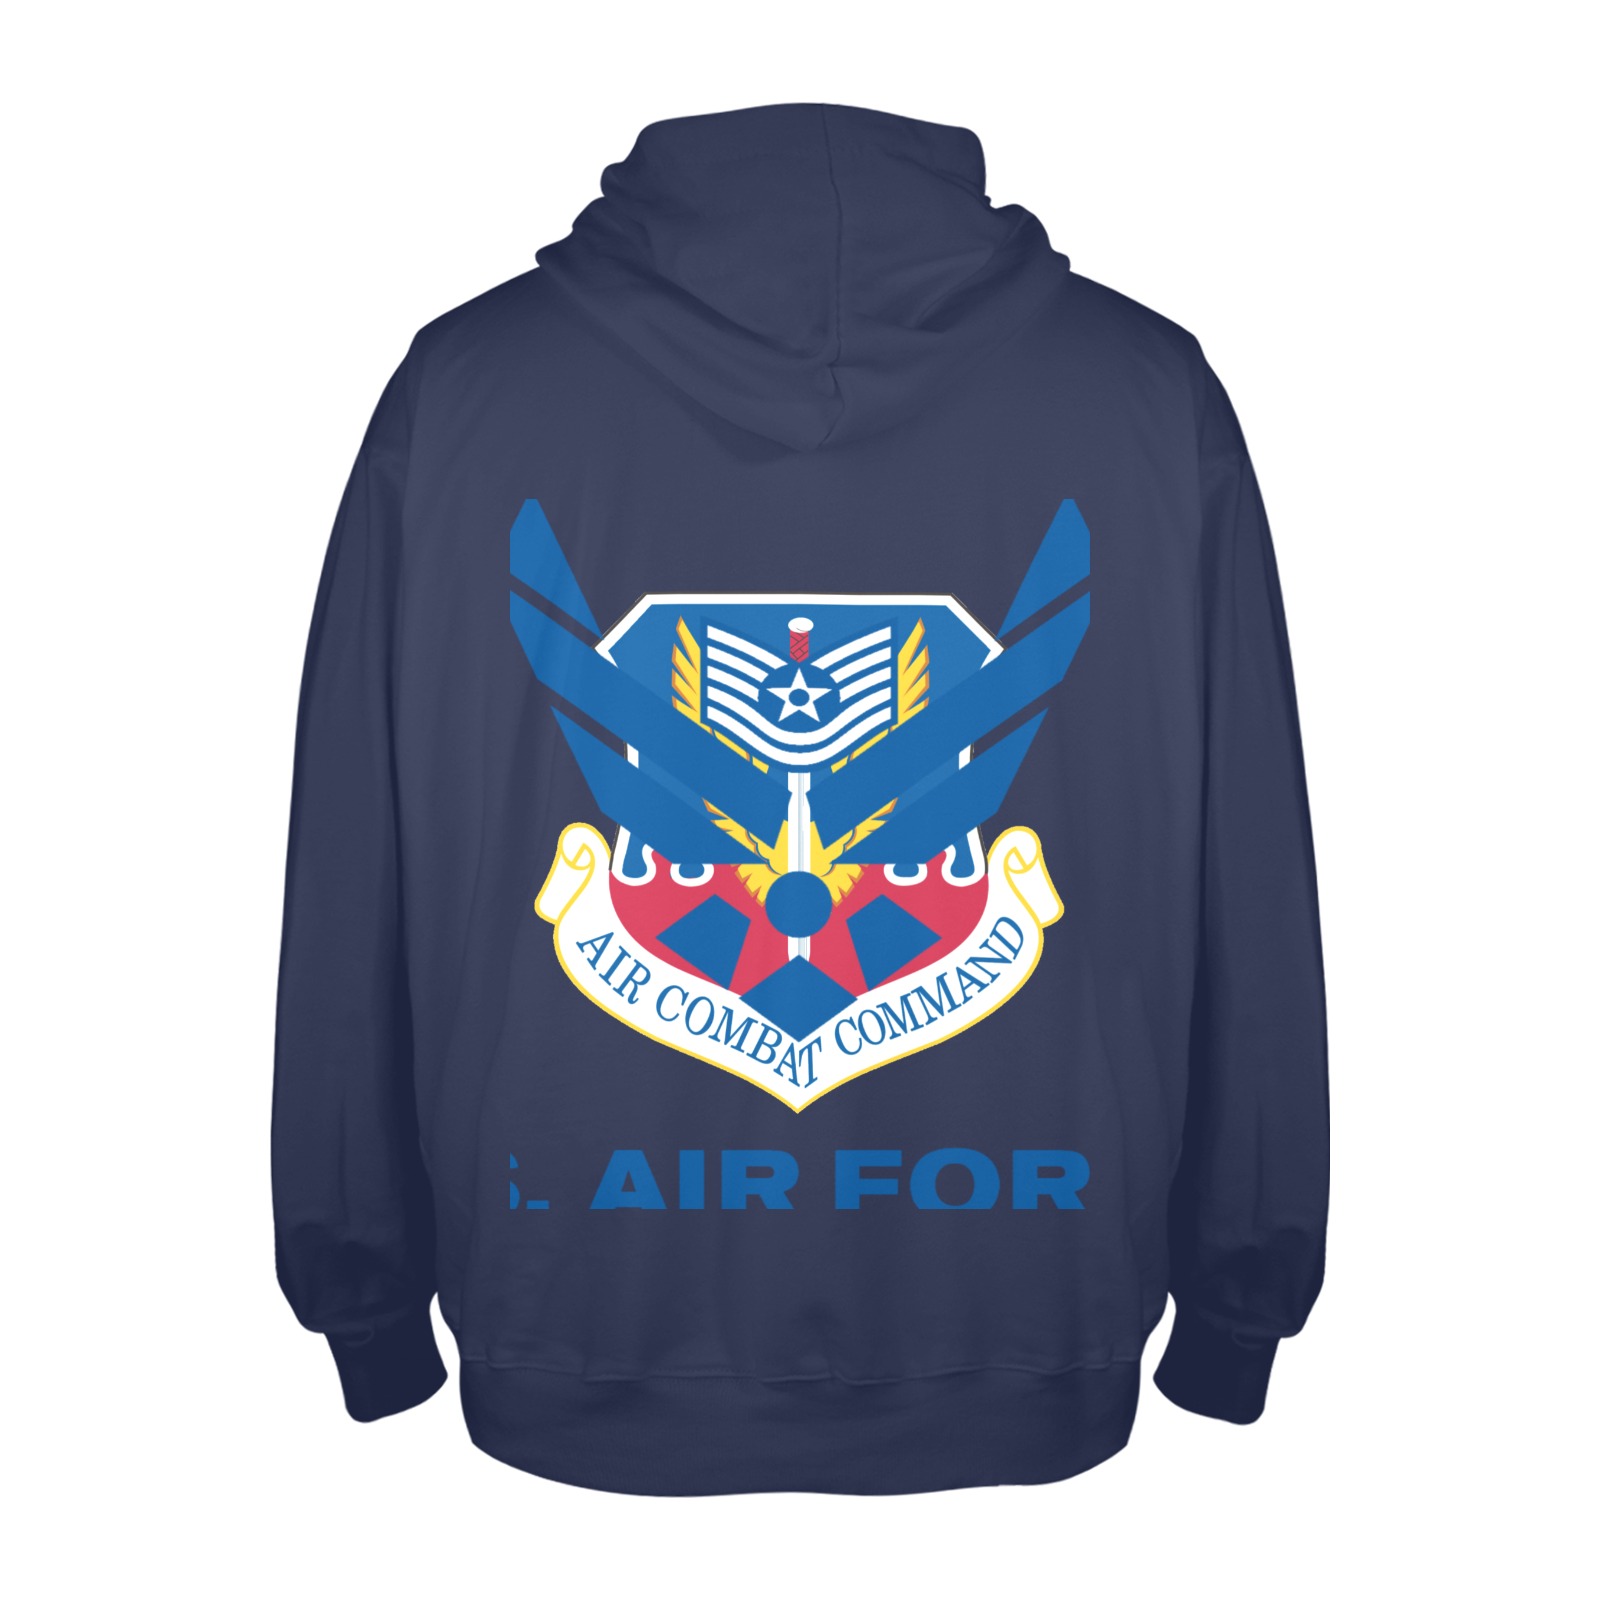 Technical Sergeant Offutt Air Force Base Men's Glow in the Dark Hoodie (Two Sides Printing)